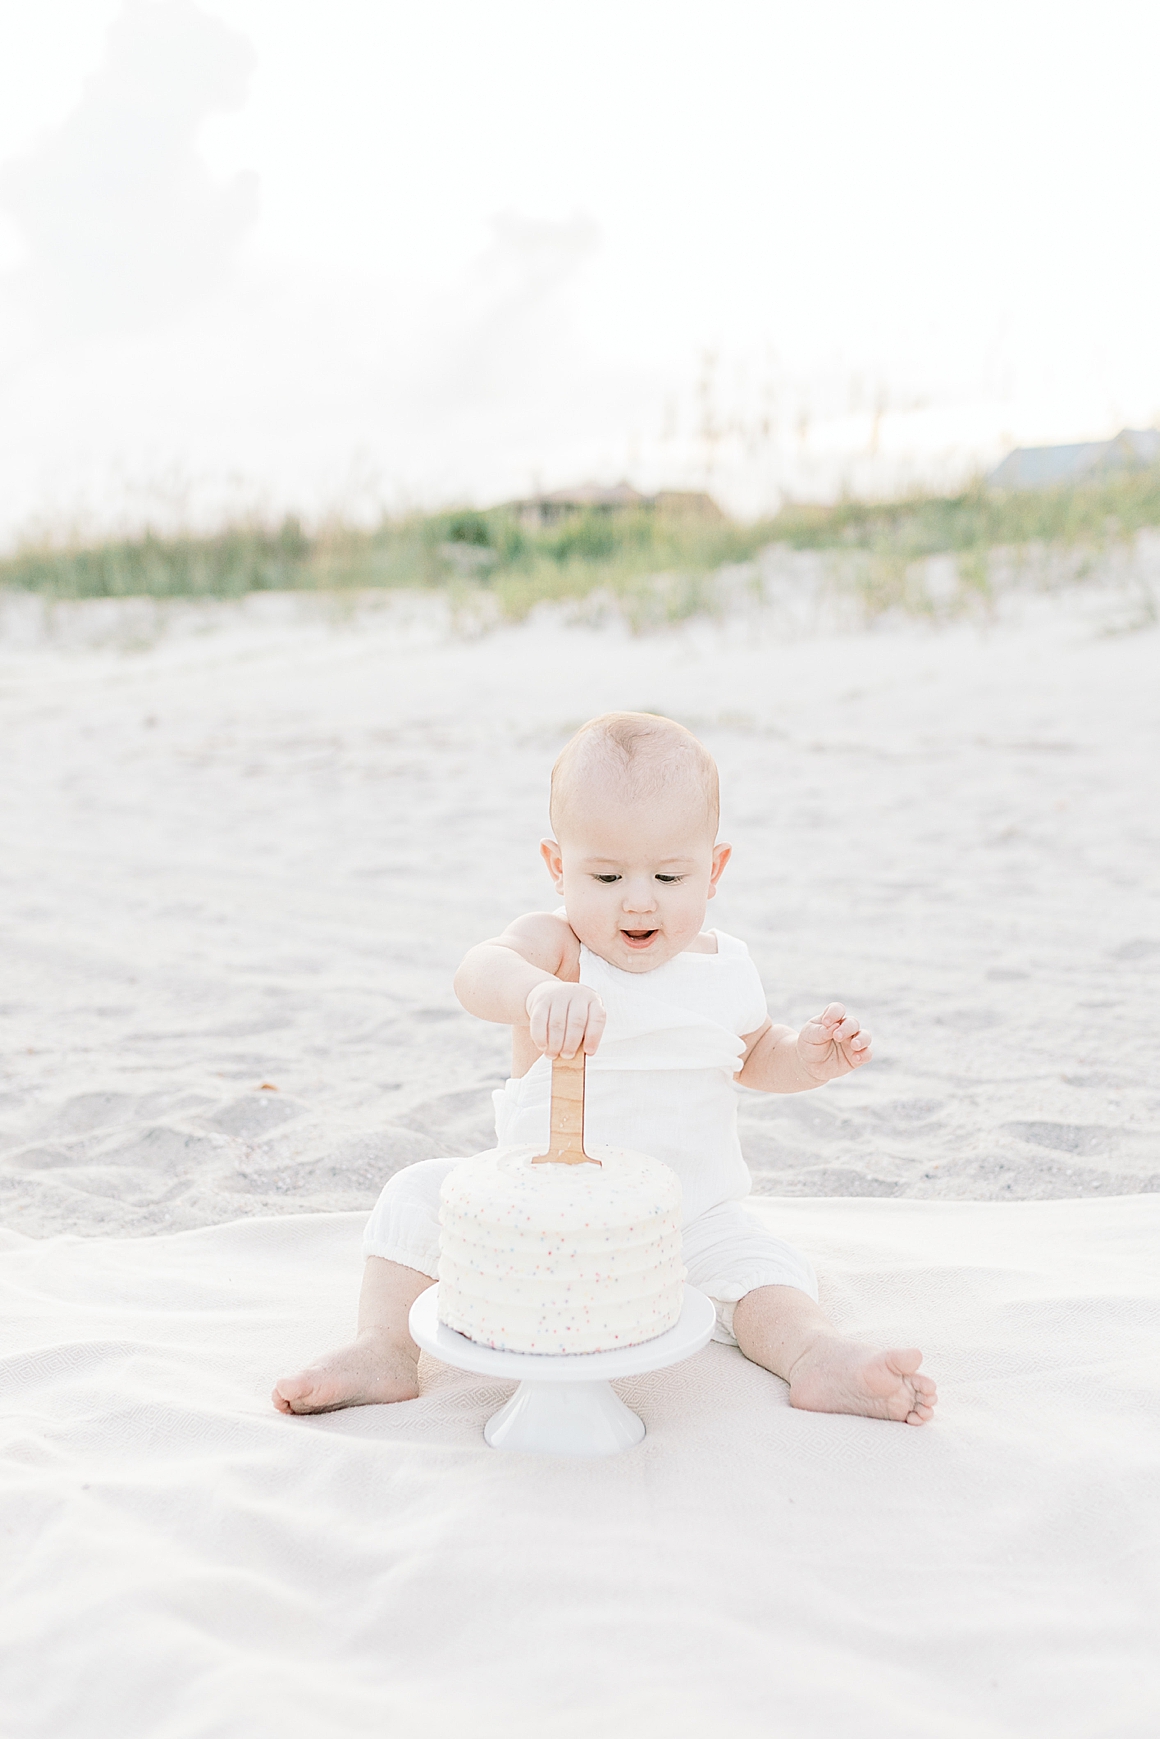 First birthday milestone session and cake smash at the beach. Photos by Isle of Palms Photographer, Caitlyn Motycka Photography.